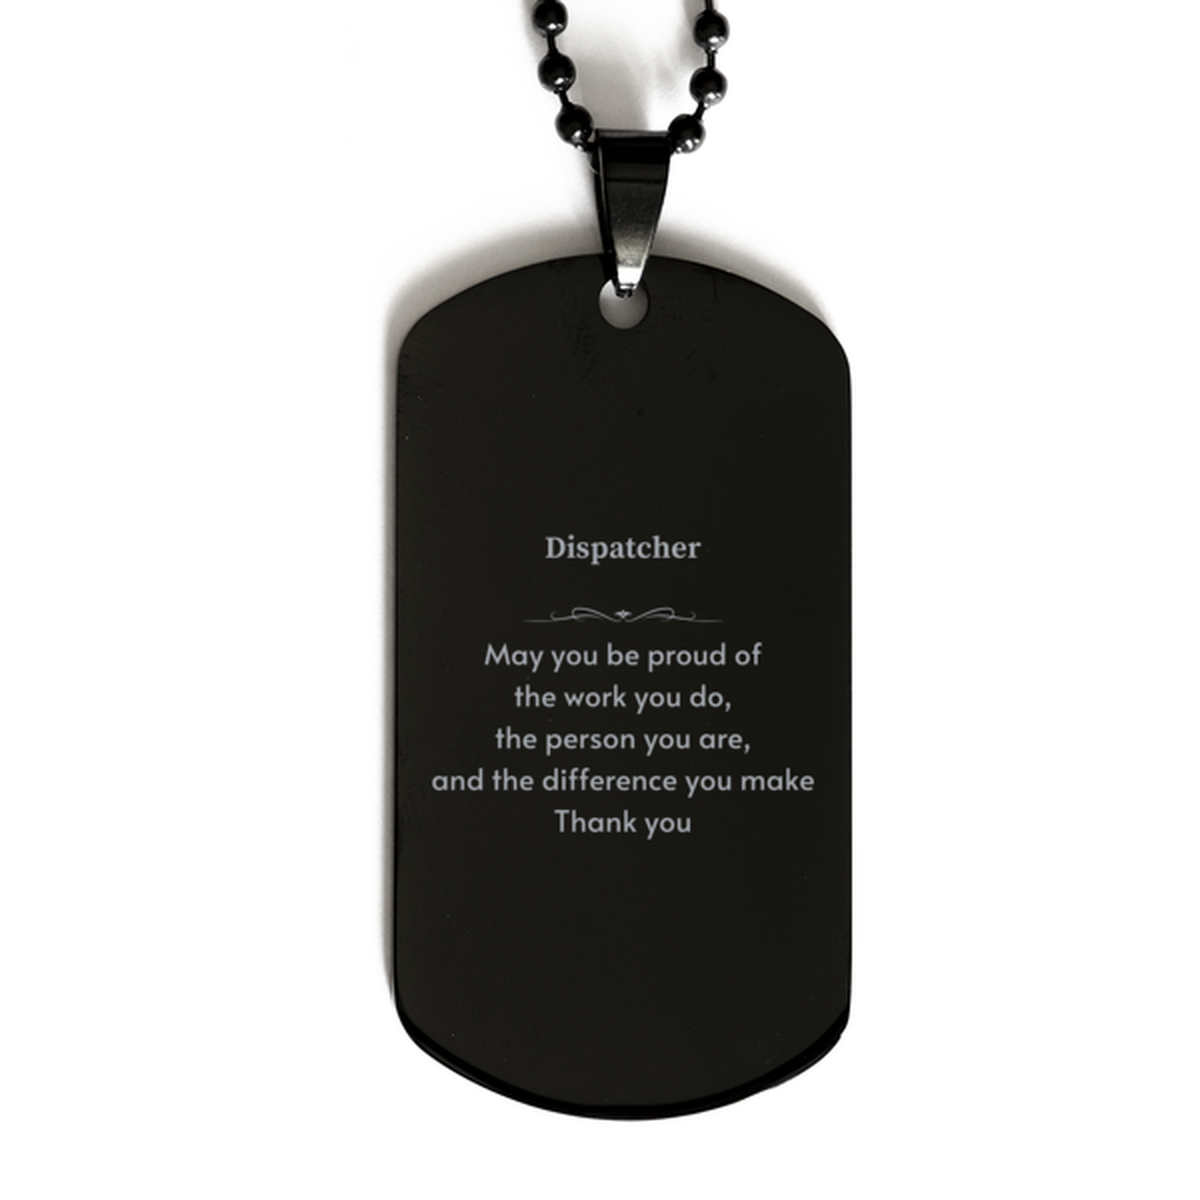 Heartwarming Black Dog Tag Retirement Coworkers Gifts for Dispatcher, Dispatcher May You be proud of the work you do, the person you are Gifts for Boss Men Women Friends